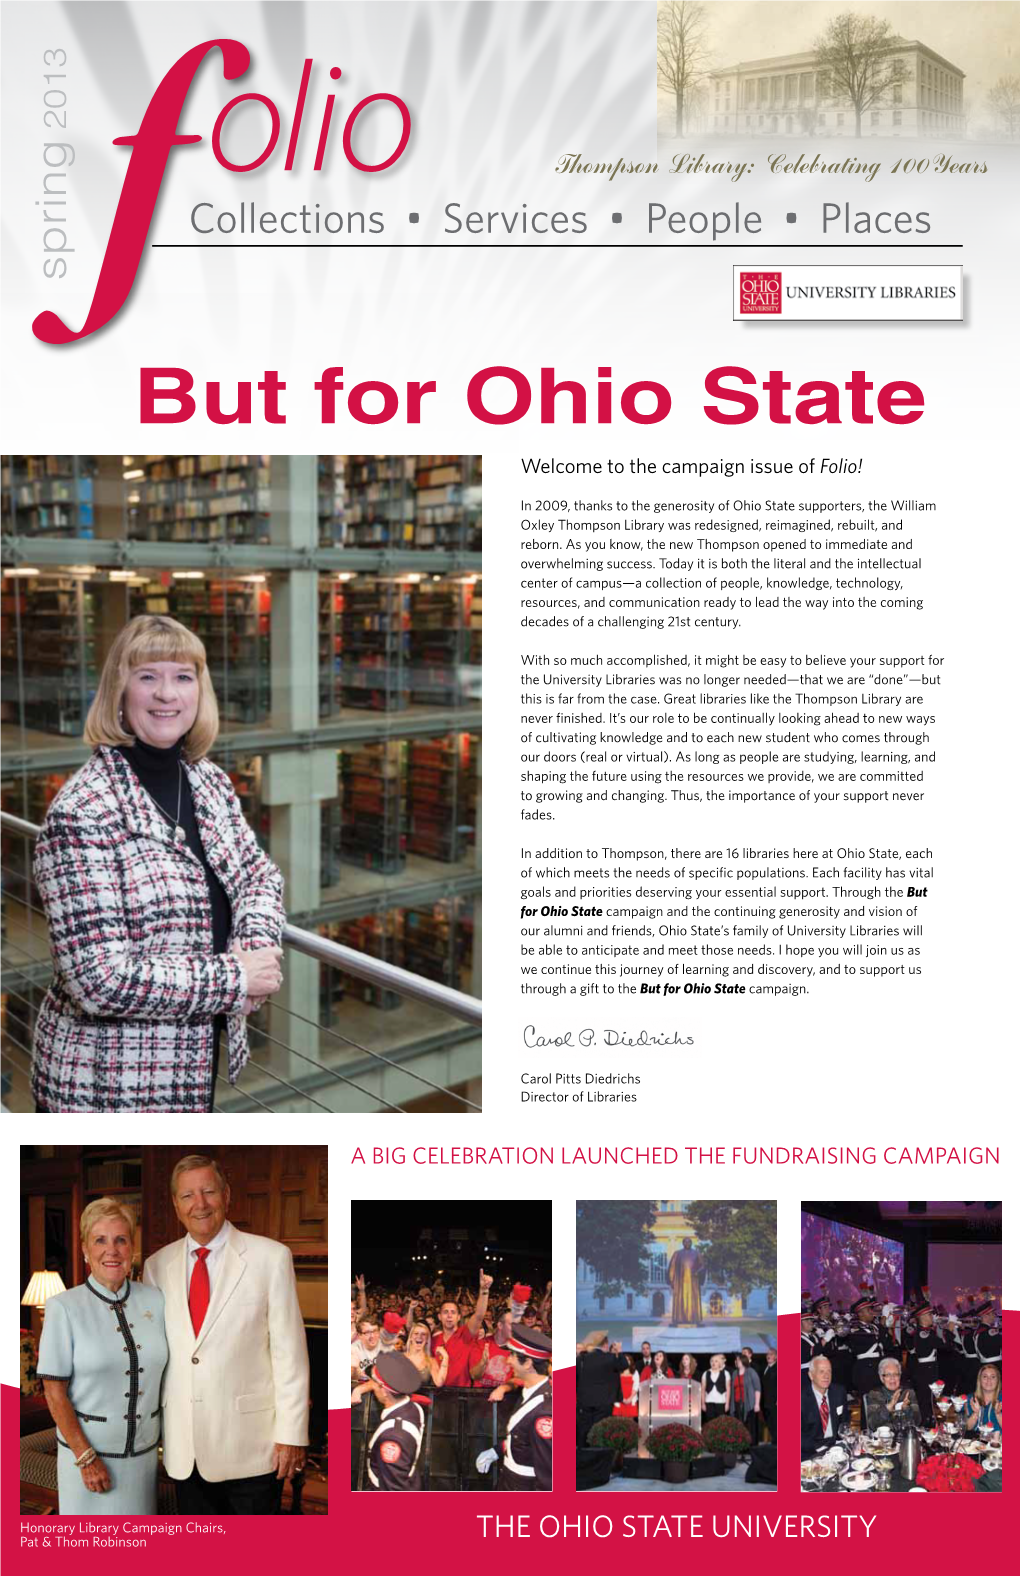 But for Ohio State Welcome to the Campaign Issue of Folio!